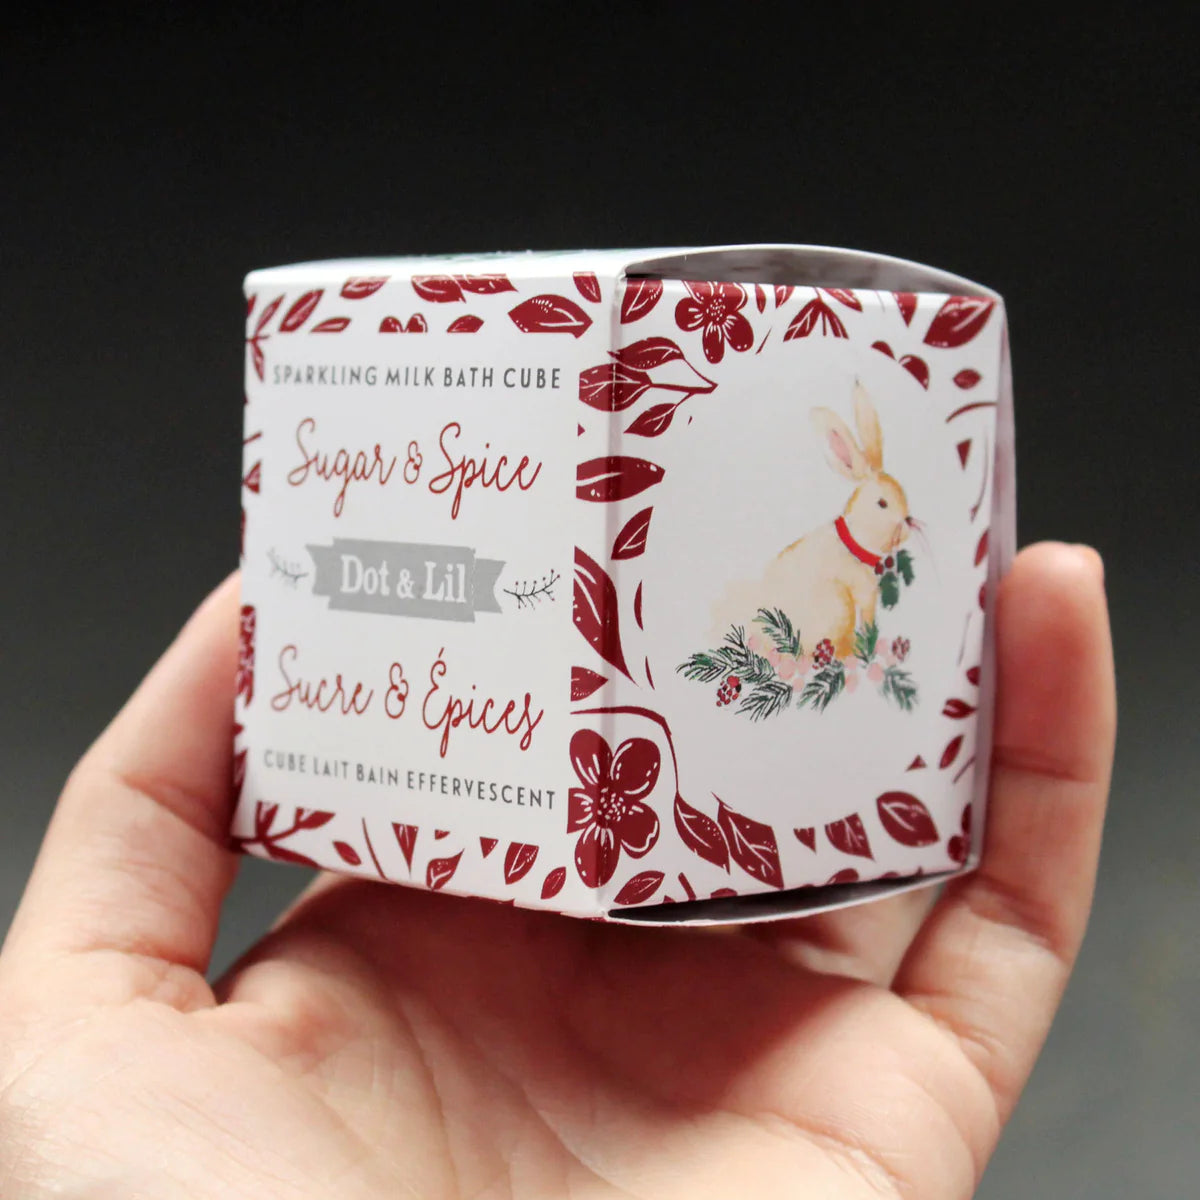 Sugar and Spice Sparkling Milk Bath Cube - Dot and Lil